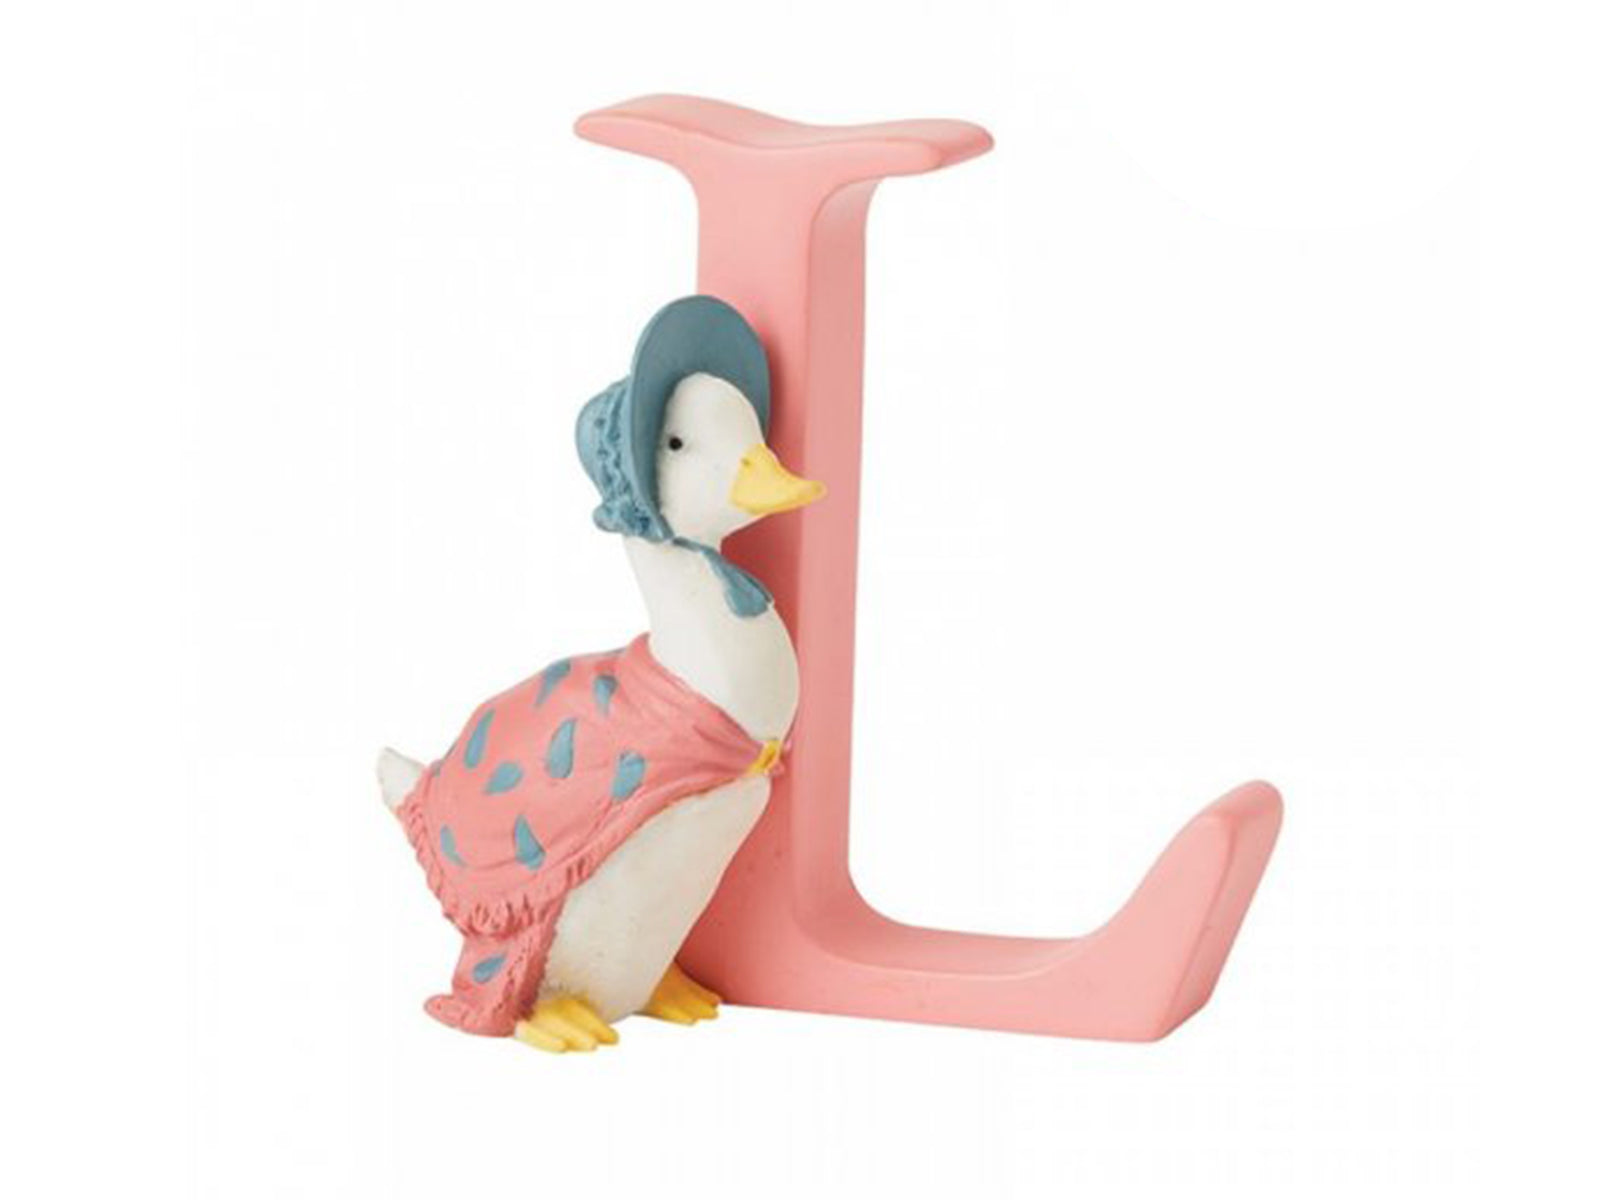 A capital letter L painted a pastel pink with a white duck next to it. The duck has yellow feet and a yellow beak, and is wearing a pink shawl with blue drops on it and a blue bonnet.